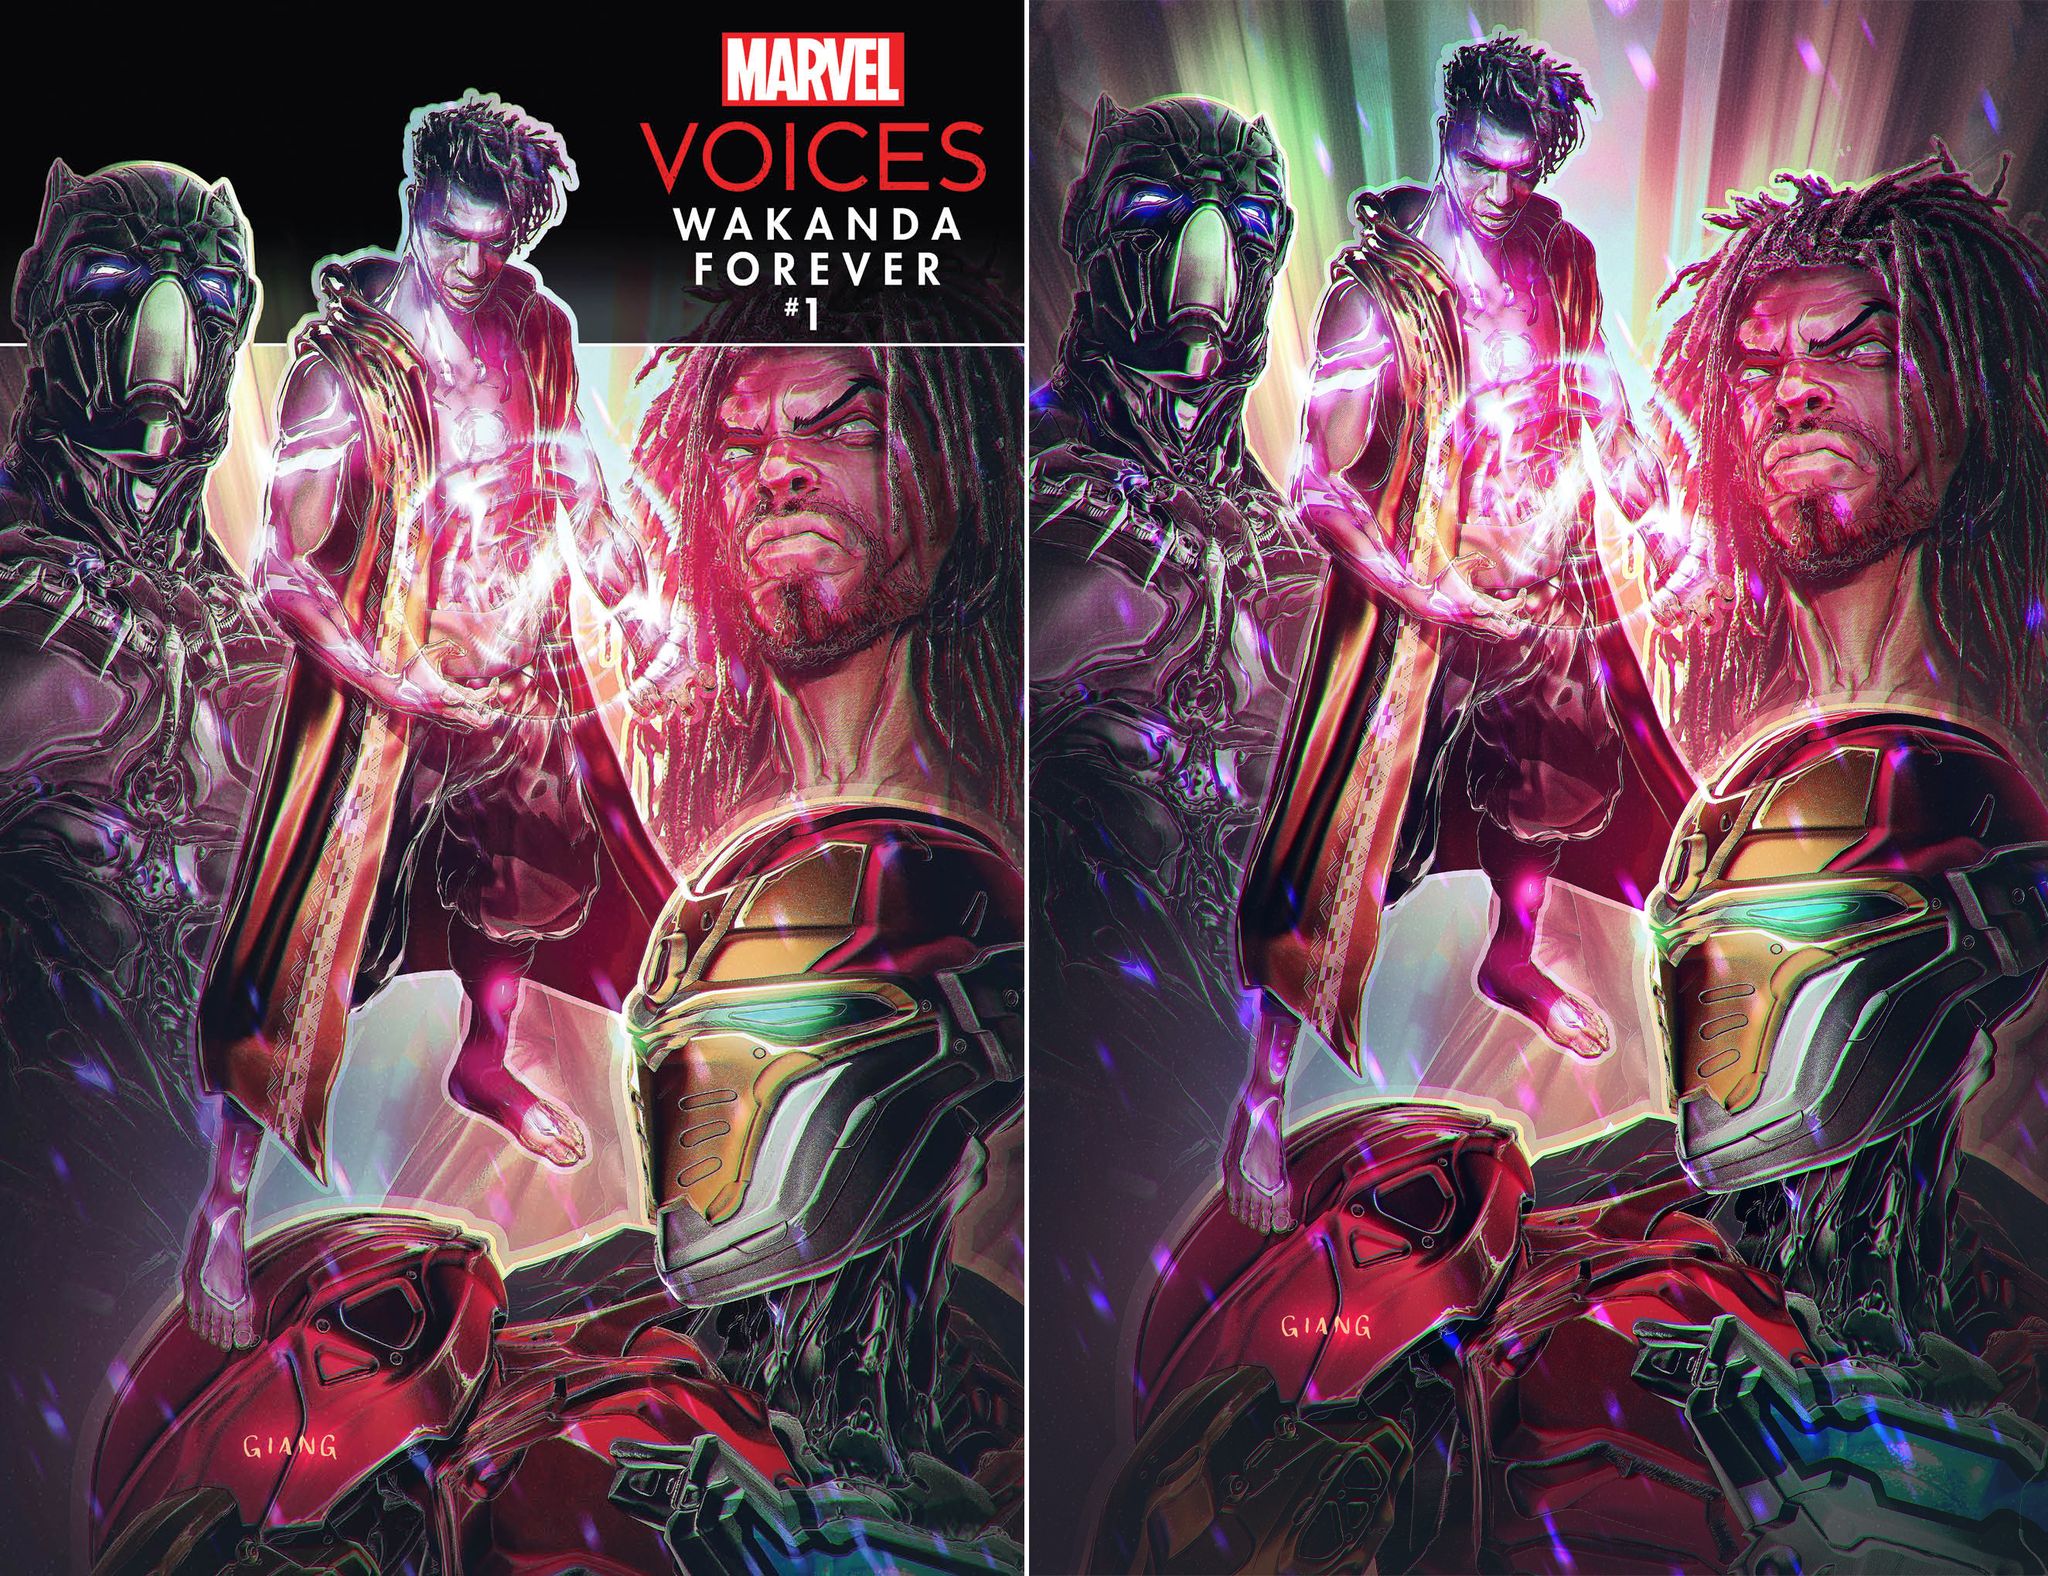 MARVELS VOICES WAKANDA FOREVER #1 JOHN GIANG EXCLUSIVE VARIANT OPTIONS